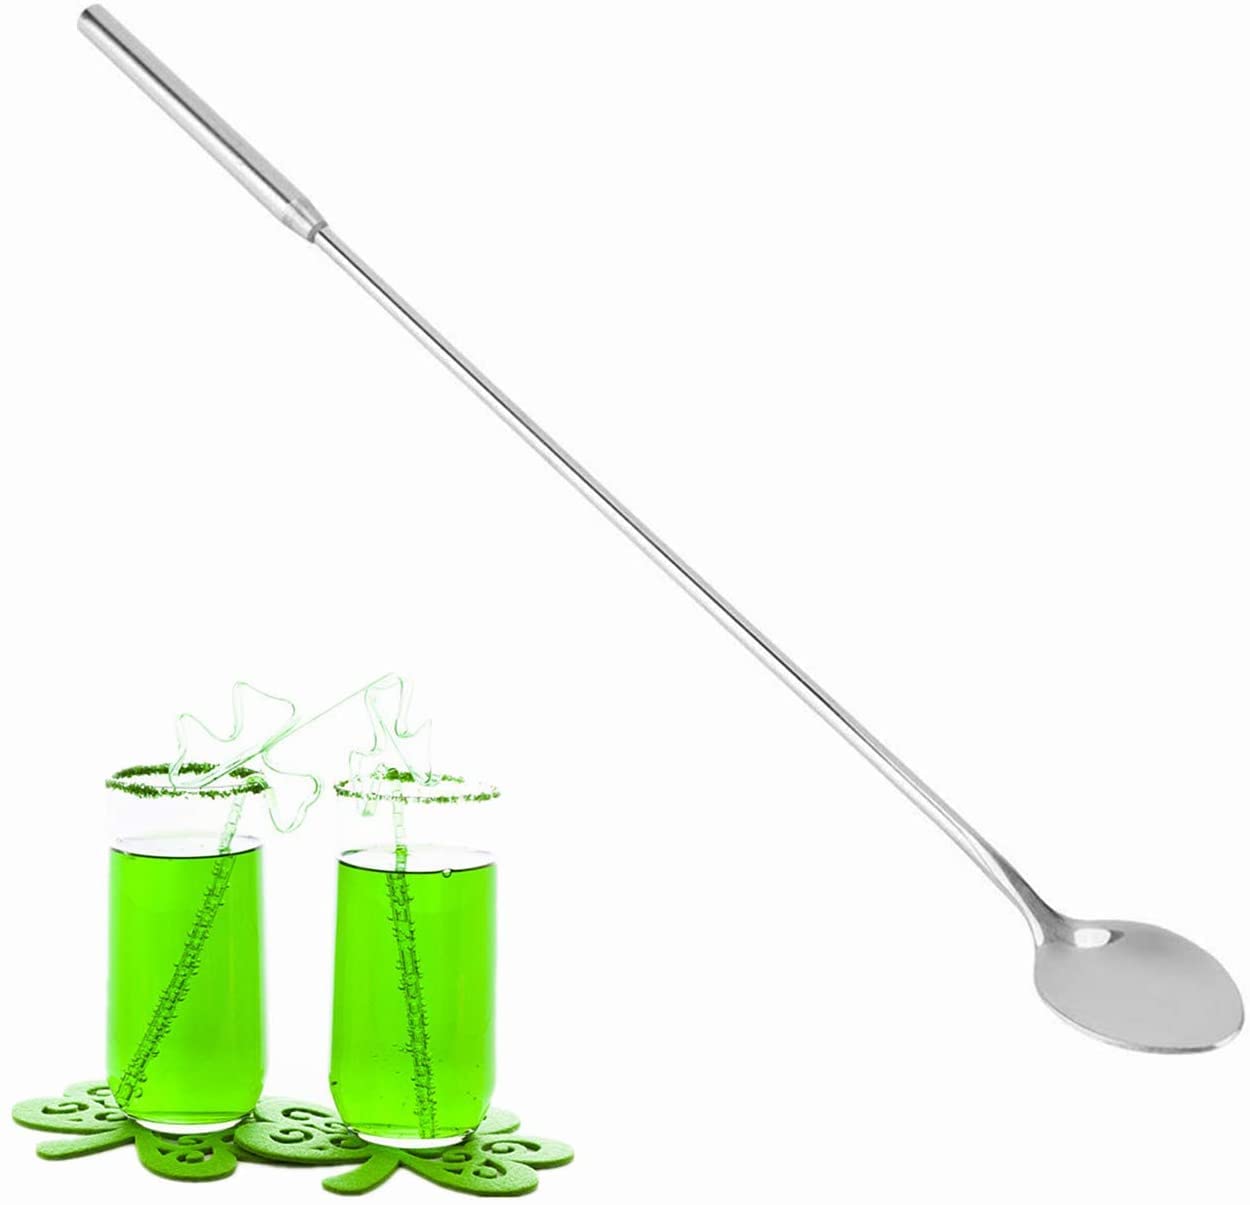 NJ Long Bar Spoon Stirrer, Extra Long Handle Stirring Spoon, Limited Edition Bar Spoon with Smooth Long Handle : 40 cm